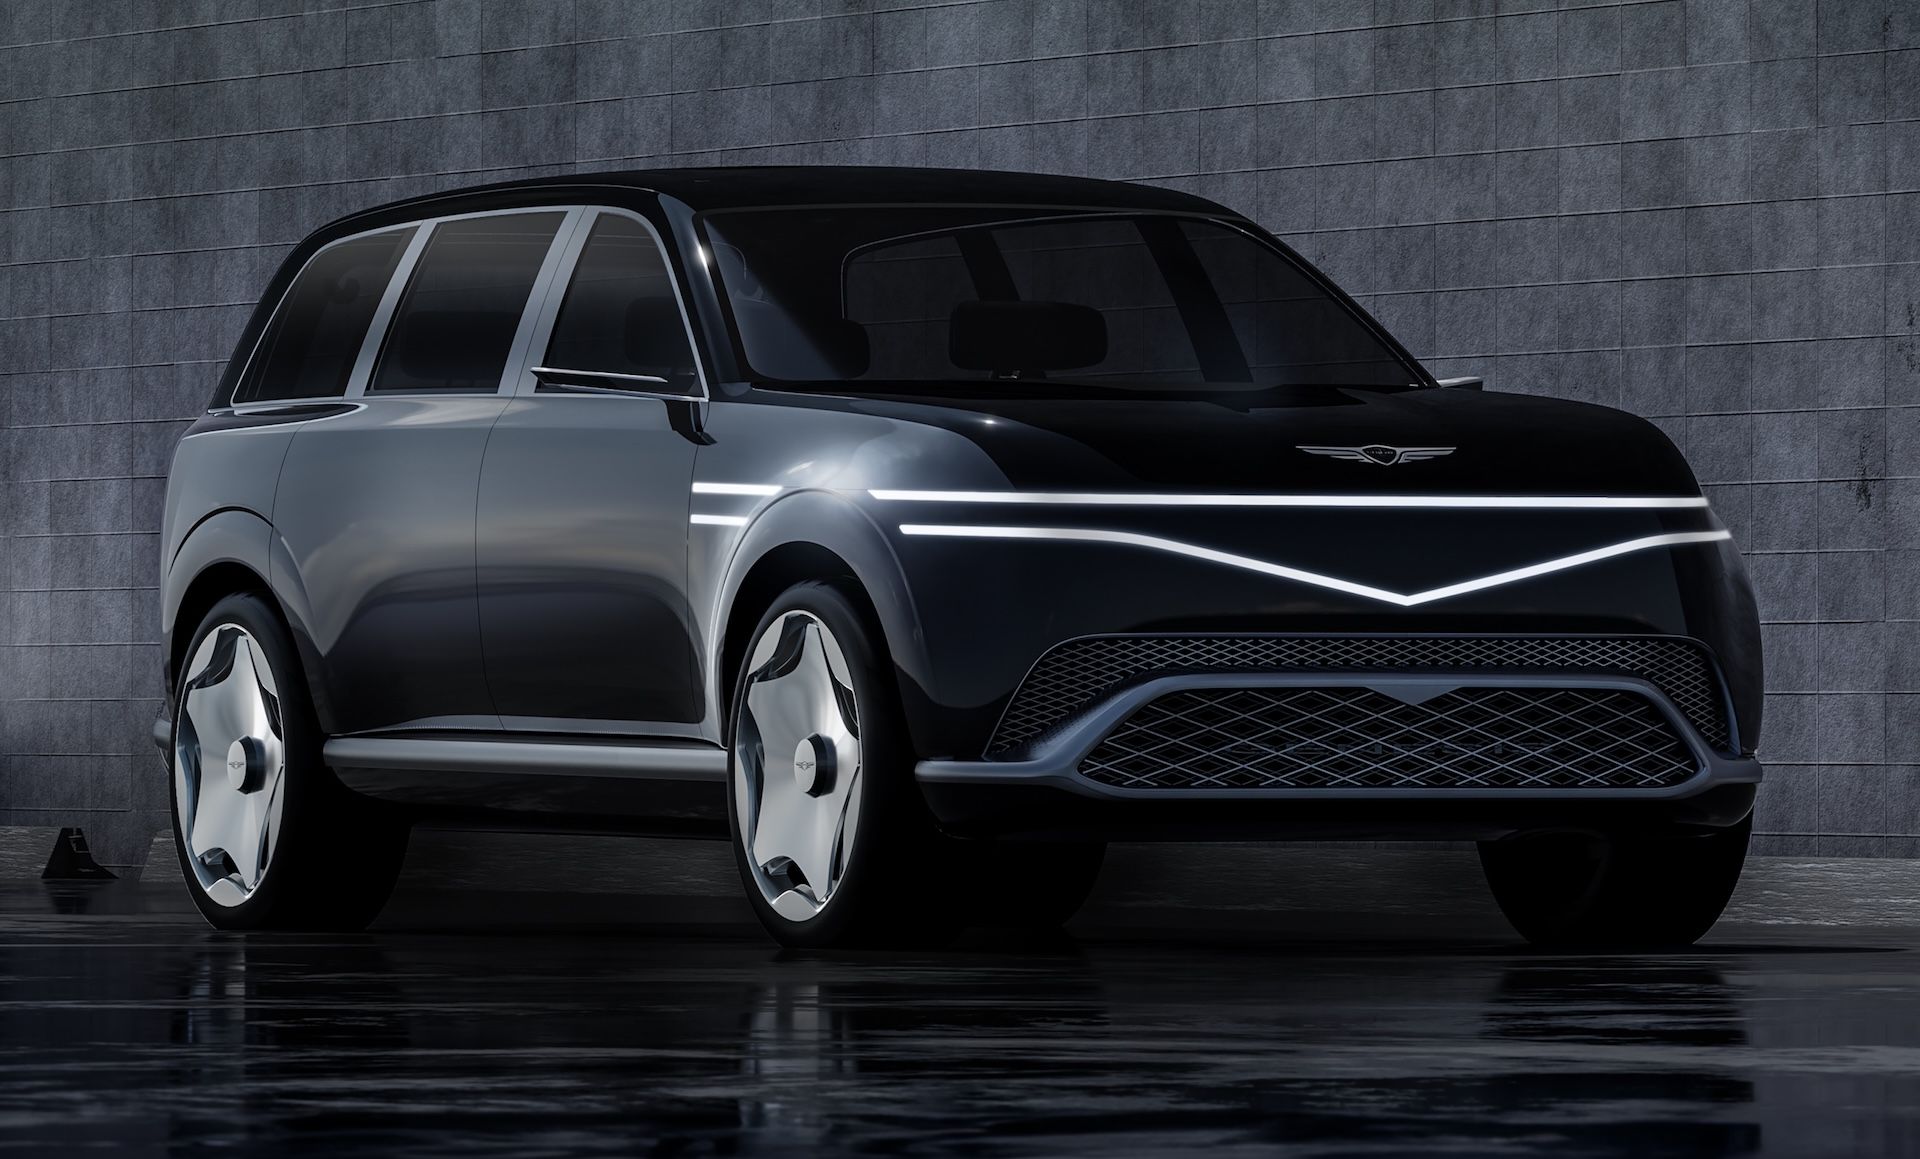 Genesis Neolun Concept Previews The Brand's Biggest Vehicle Yet